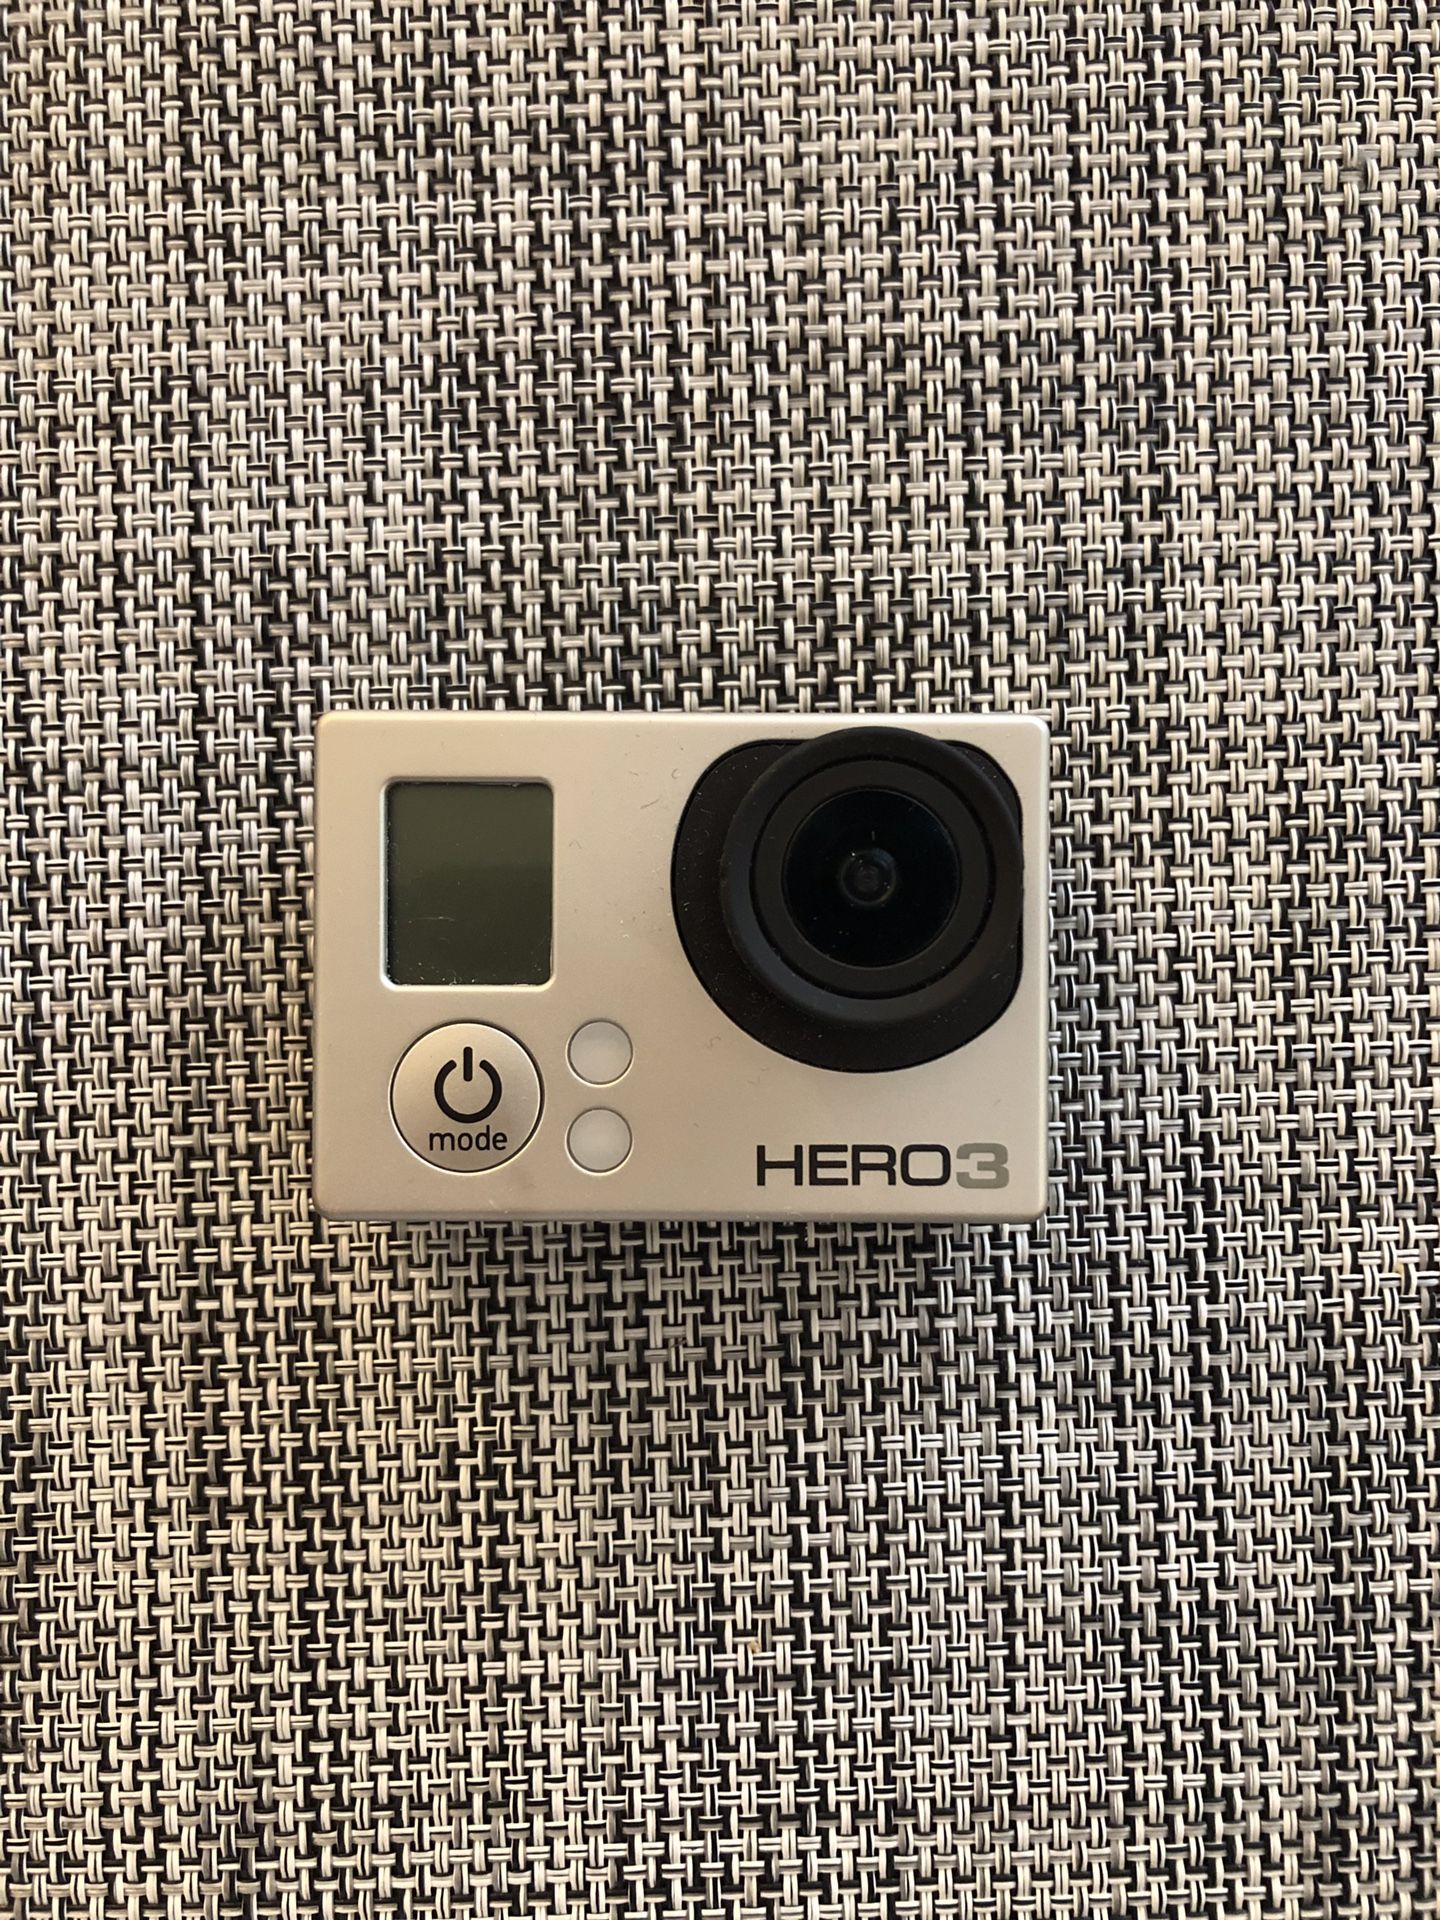 GoPro Hero 3 w/ cases and harnesses